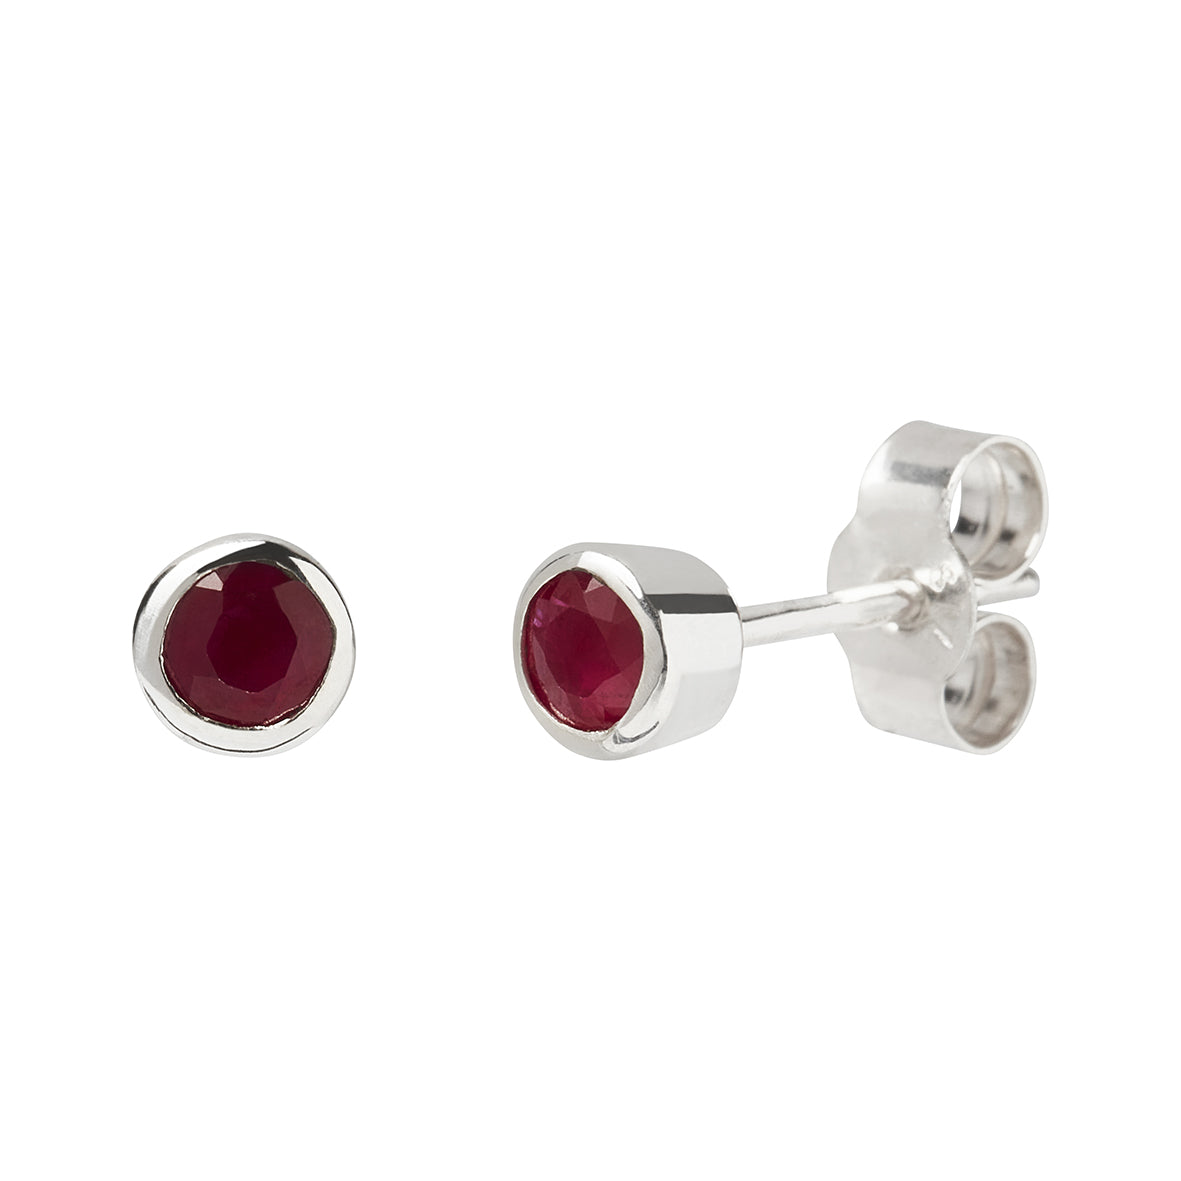 Silver round bezel earrings with 4mm faceted Ruby gemstone with silver pins and butterflies on a white background. Handmade at Kirsty Taylor Jewellery in North East England. 